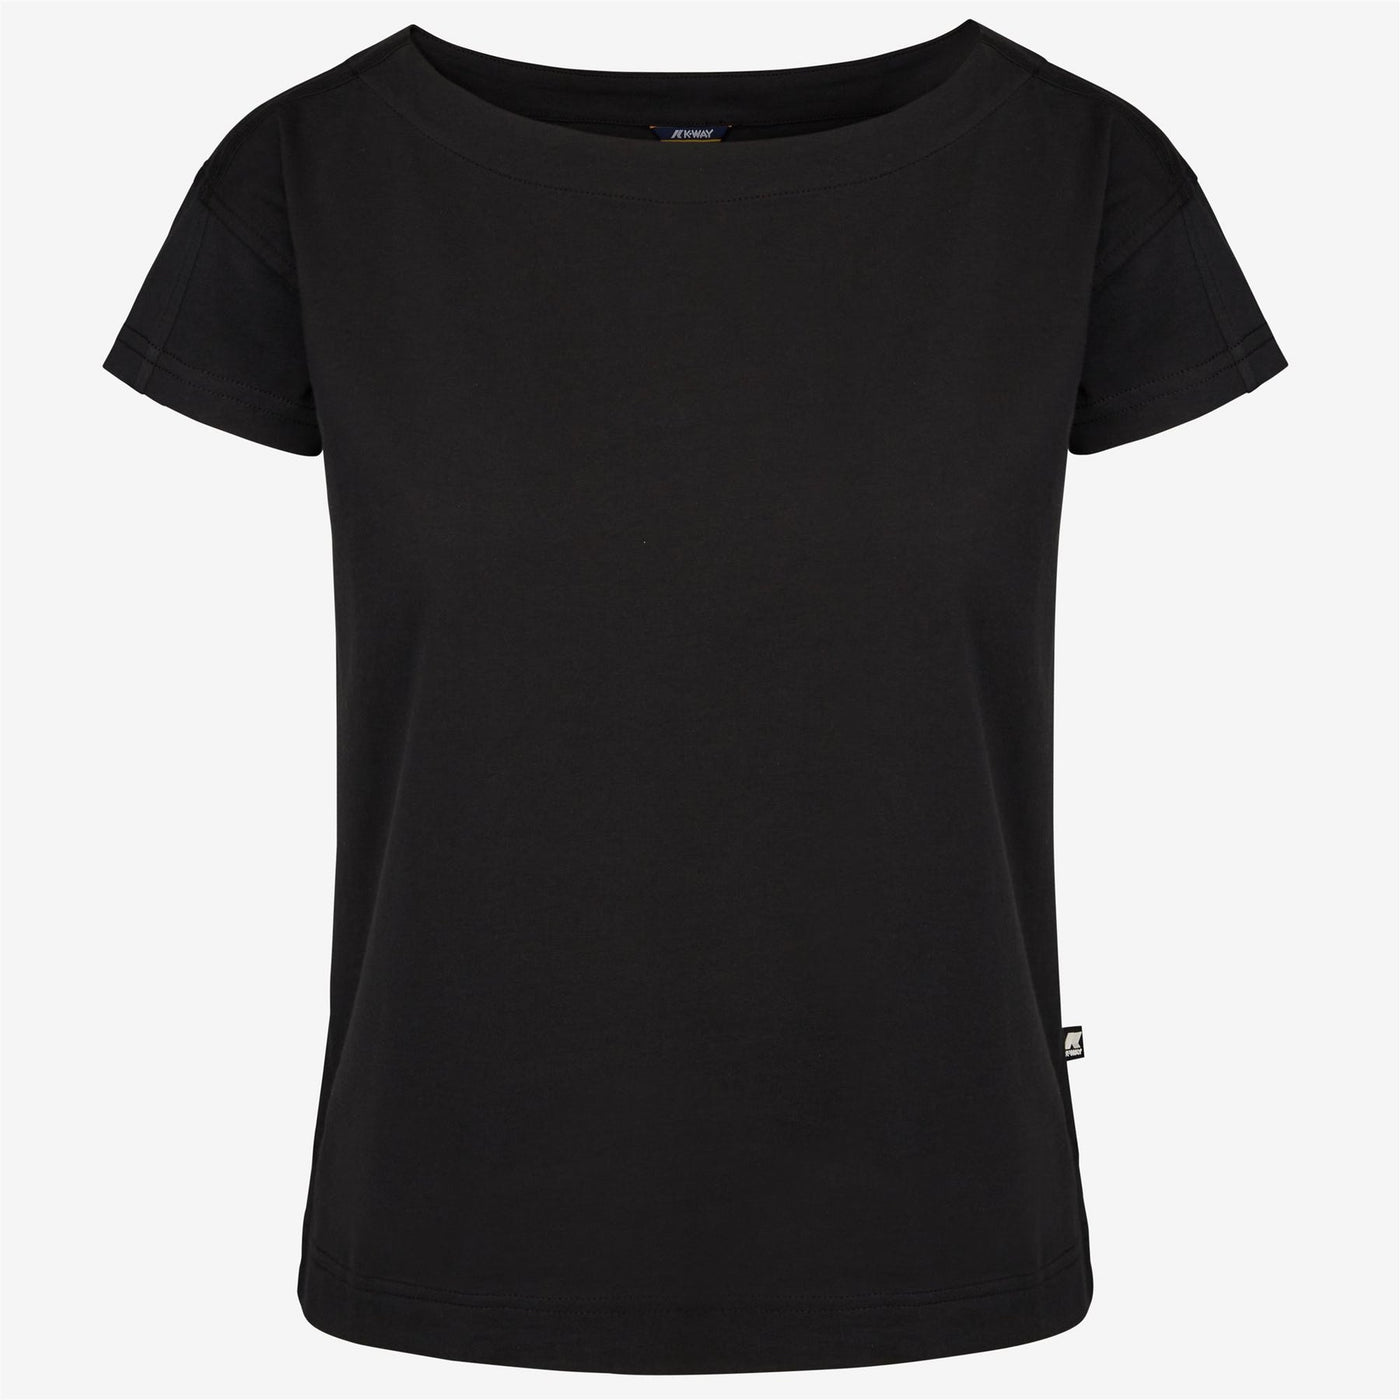 RORY - T-SHIRTS & TOP - WOMAN - BLACK PURE